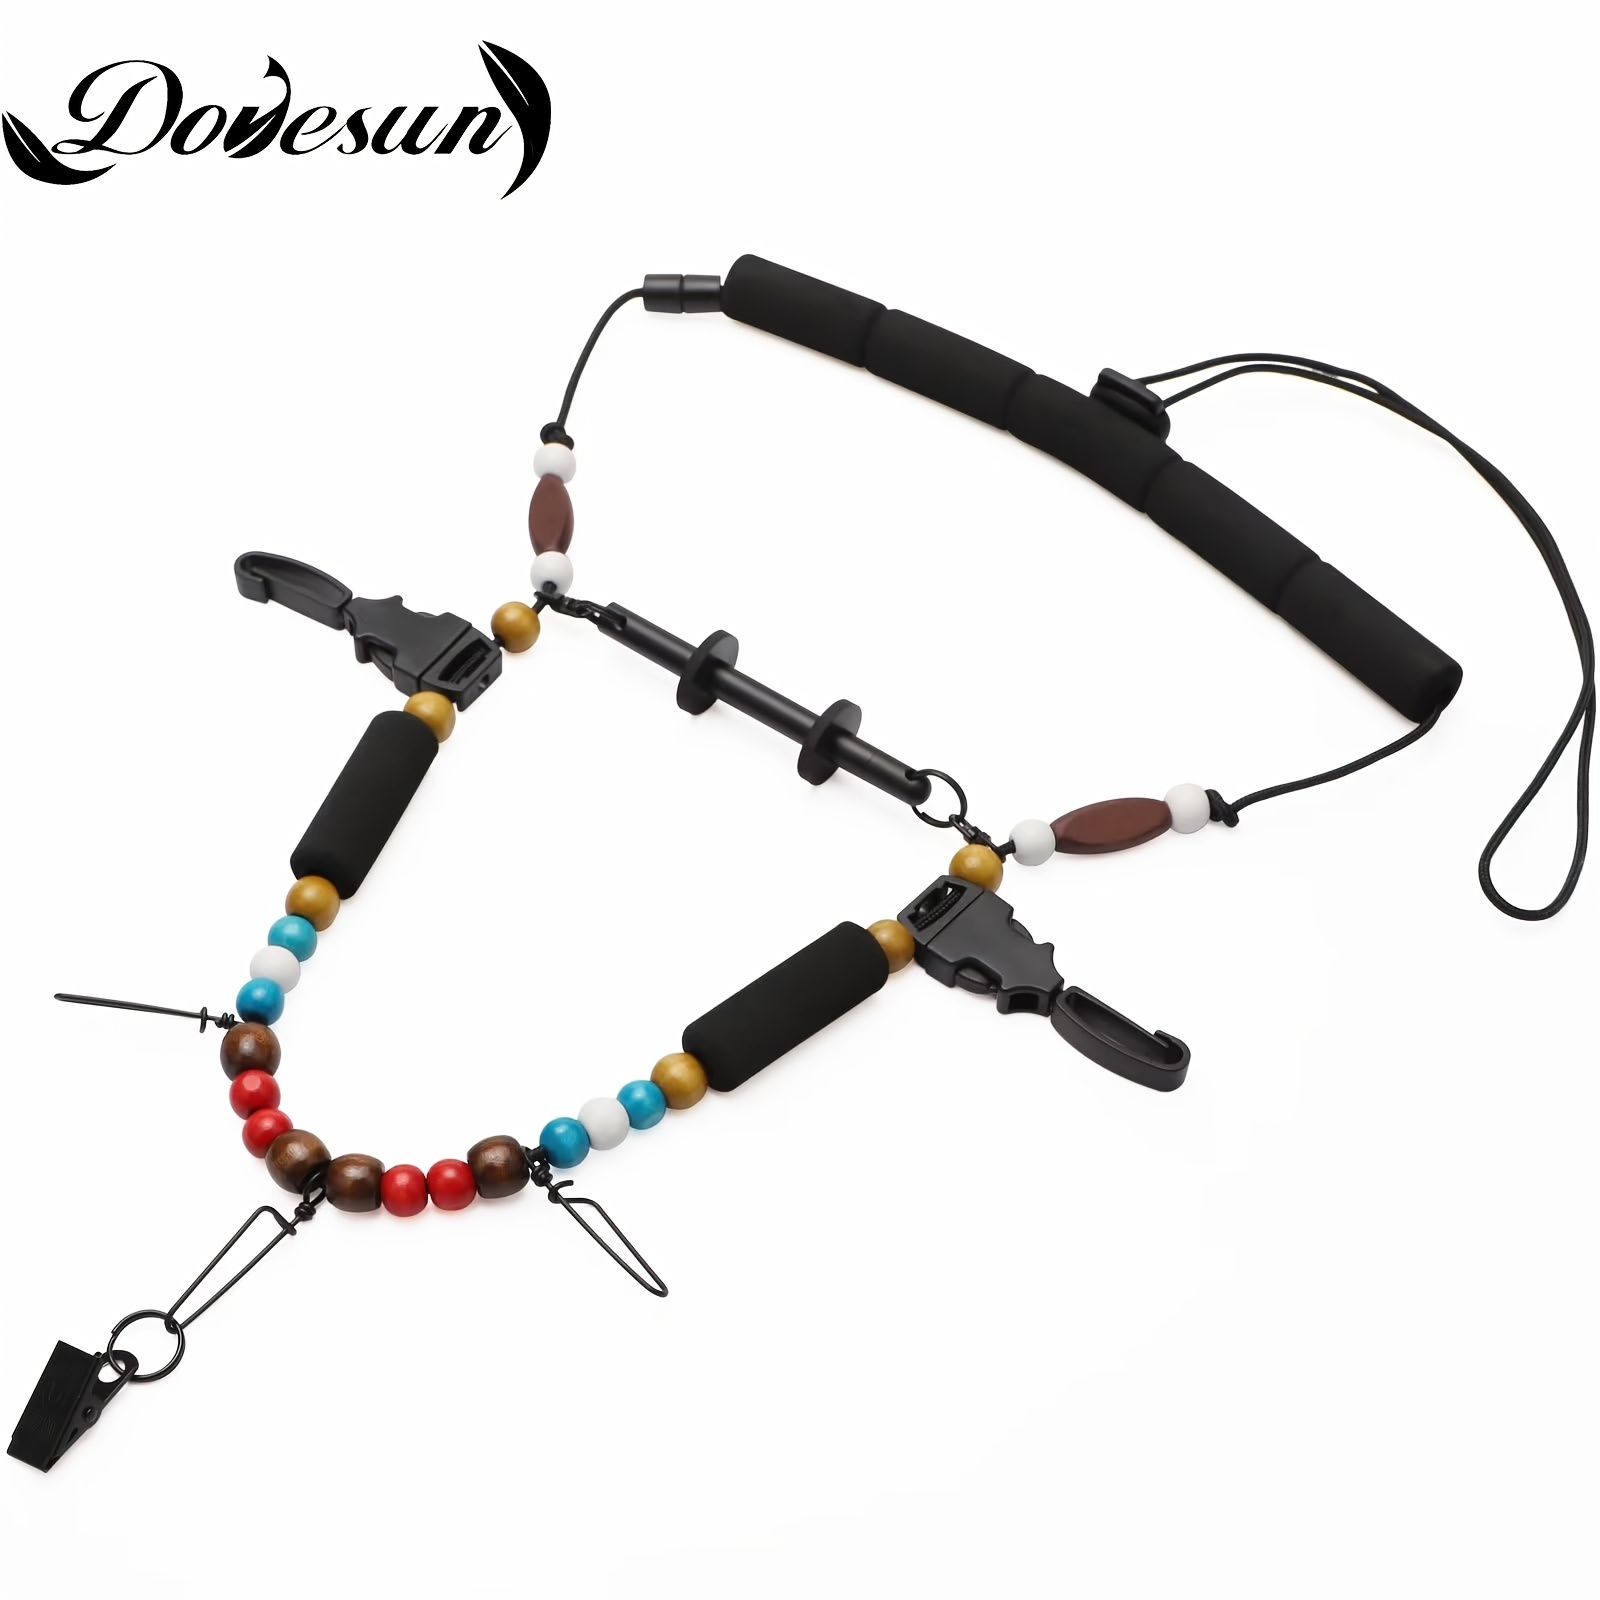 1pc Dovesun Fly Fishing Lanyard With Fly Tippet Holder, Light Weight,  Adjustable Cord Lock, Fly Fishing Accessories, Fishing Accessories